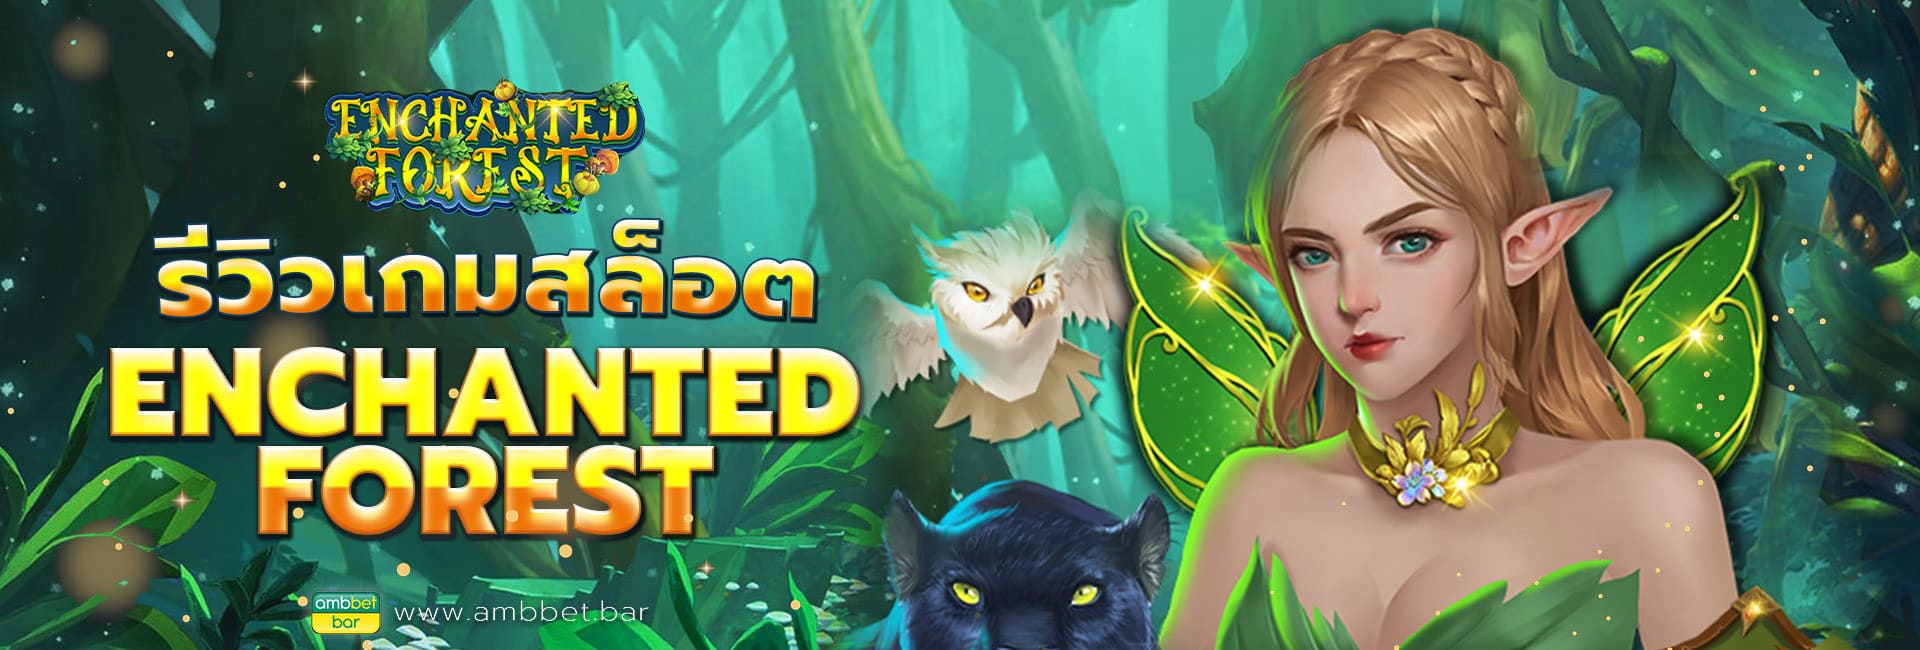 Enchanted Forest banner